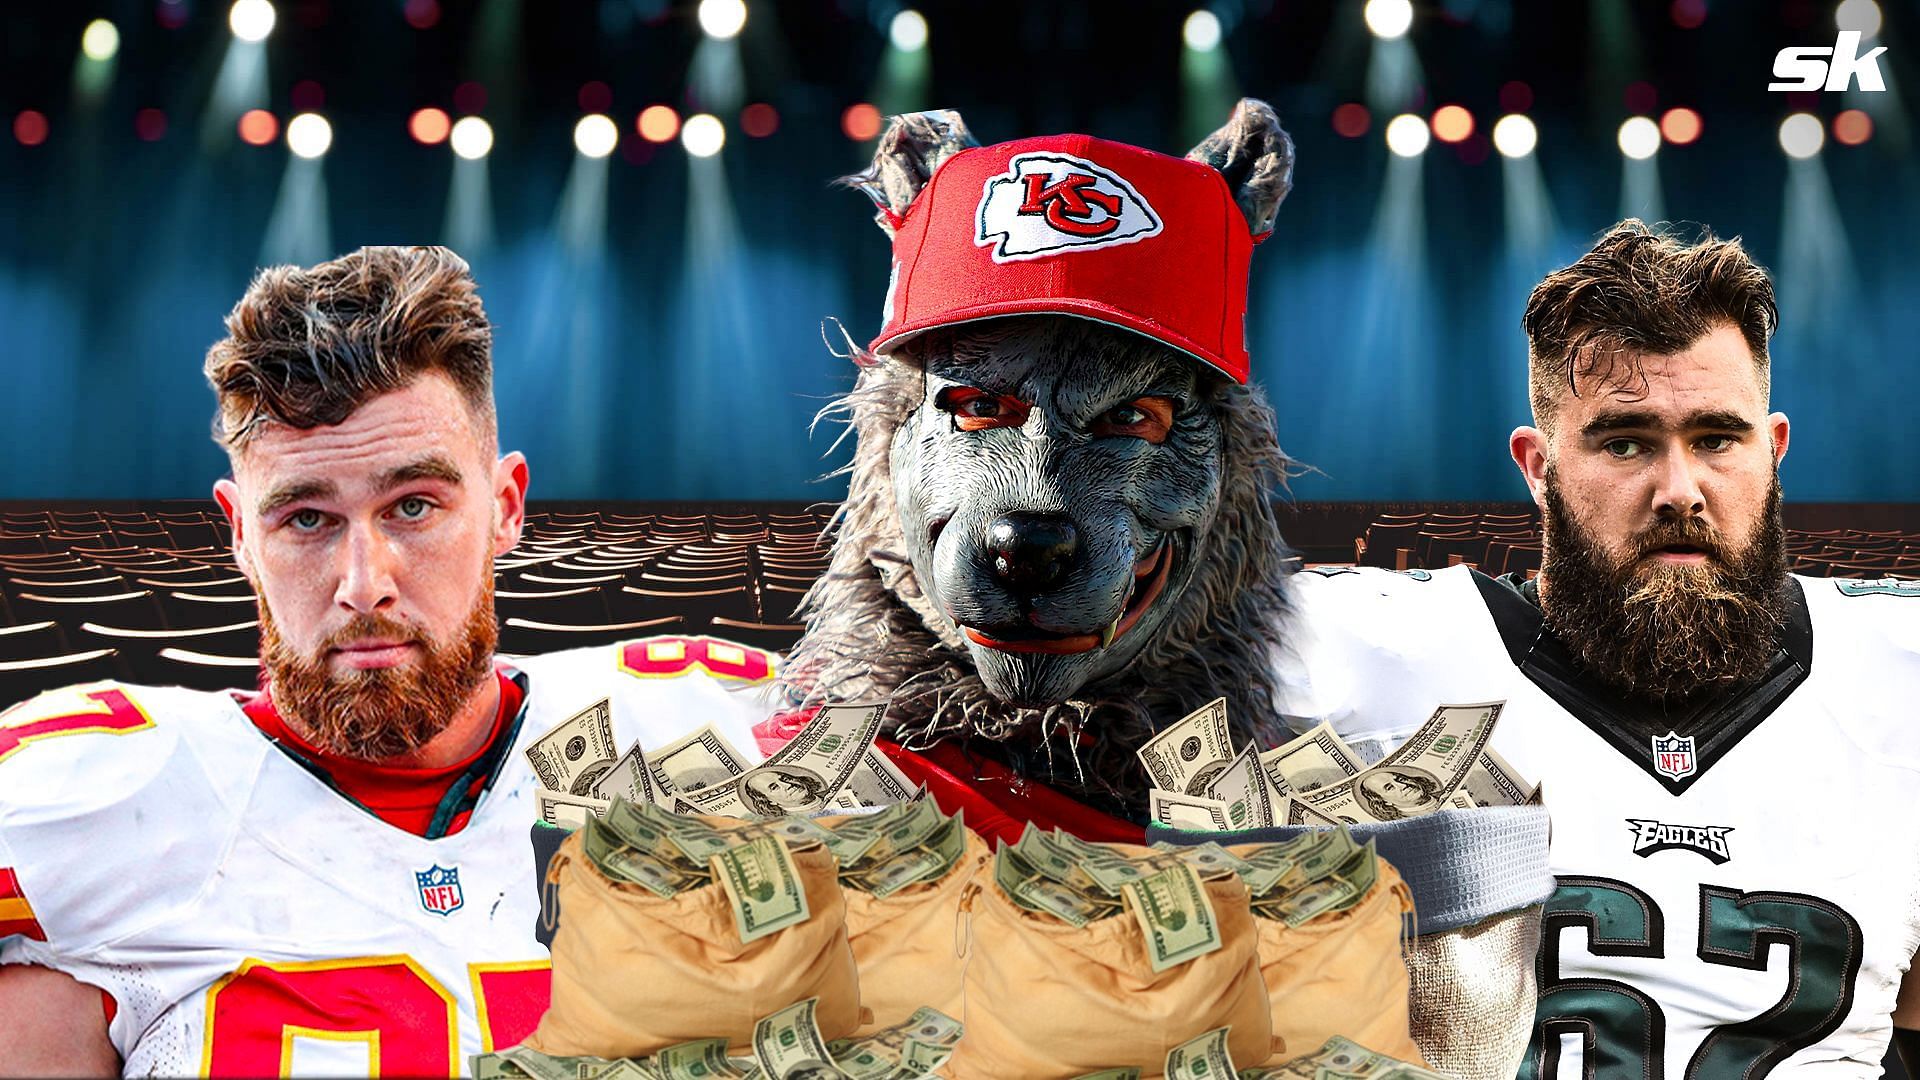 Jason and Travis Kelce know about the legend of ChiefsAholic